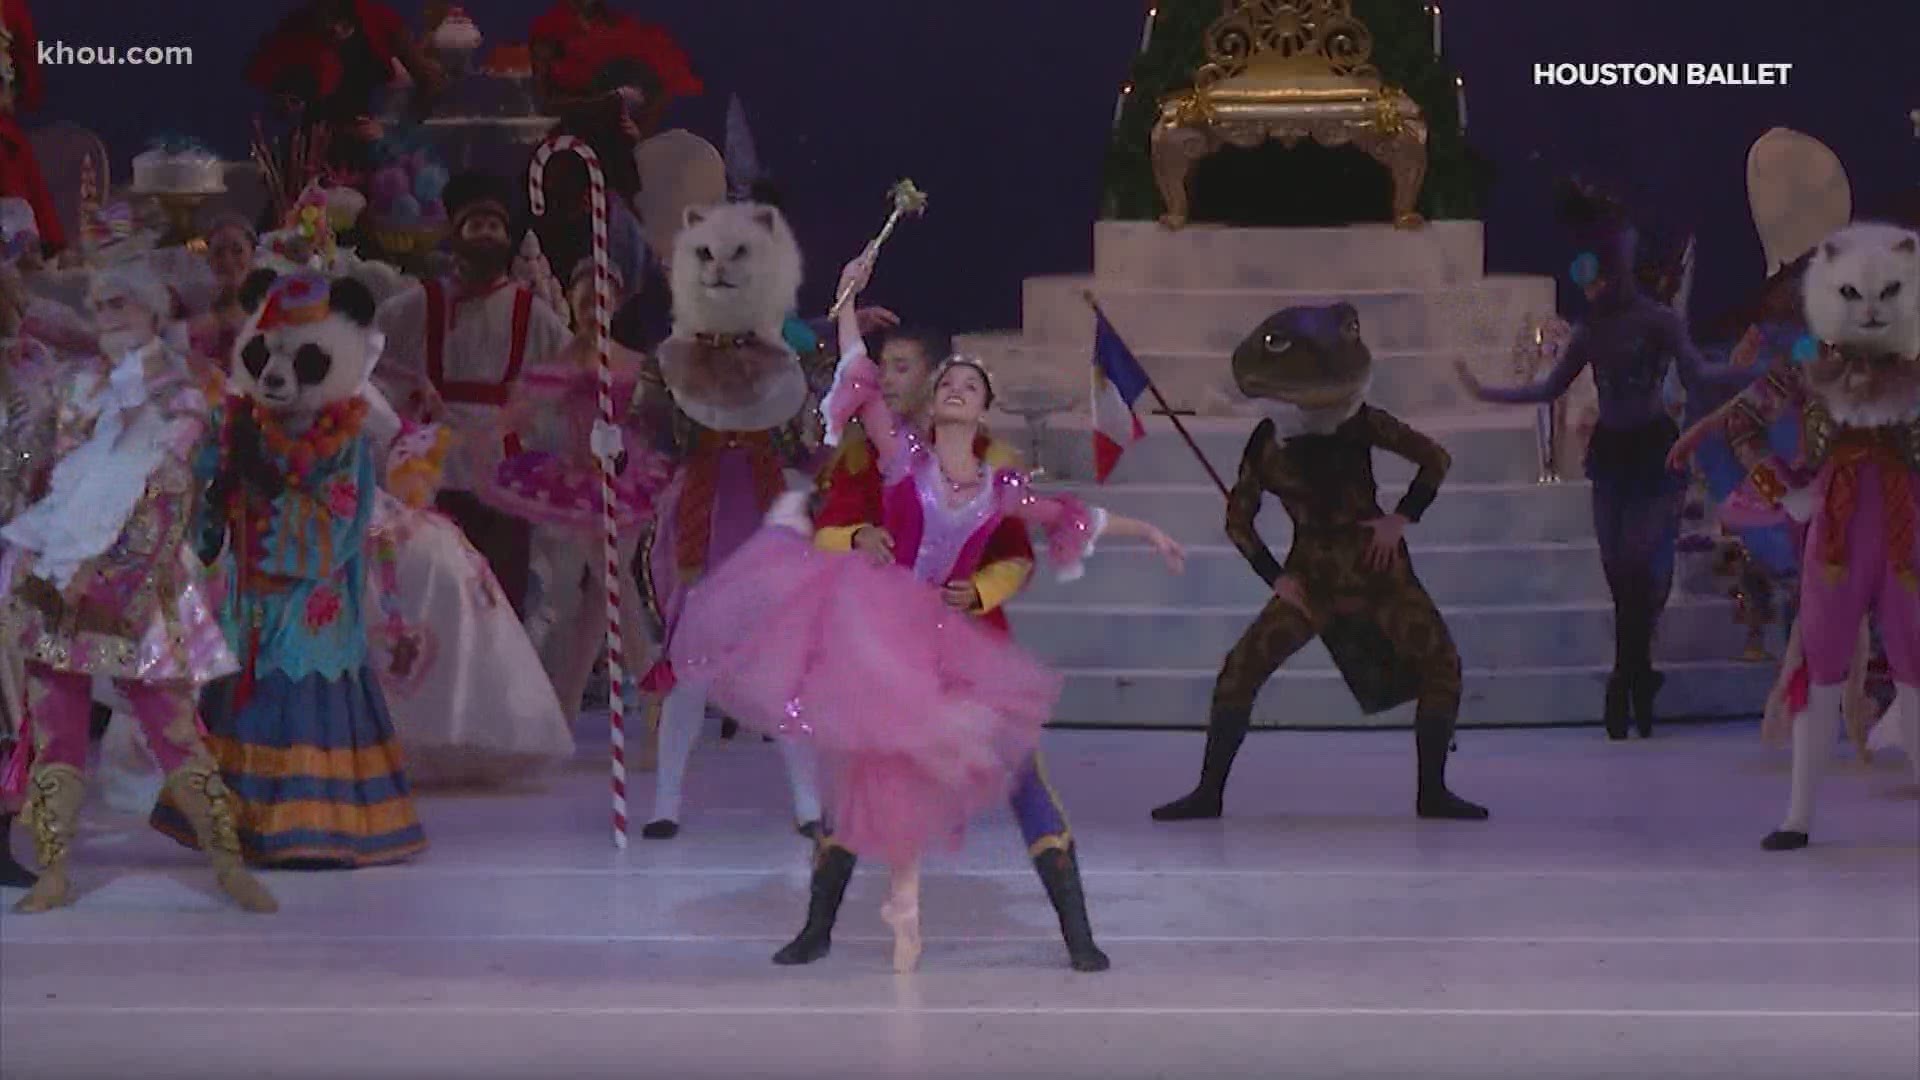 Sad news for an annual tradition in Houston: this year's performance of "The Nutcracker" has been canceled due to challenges presented by the coronavirus pandemic.